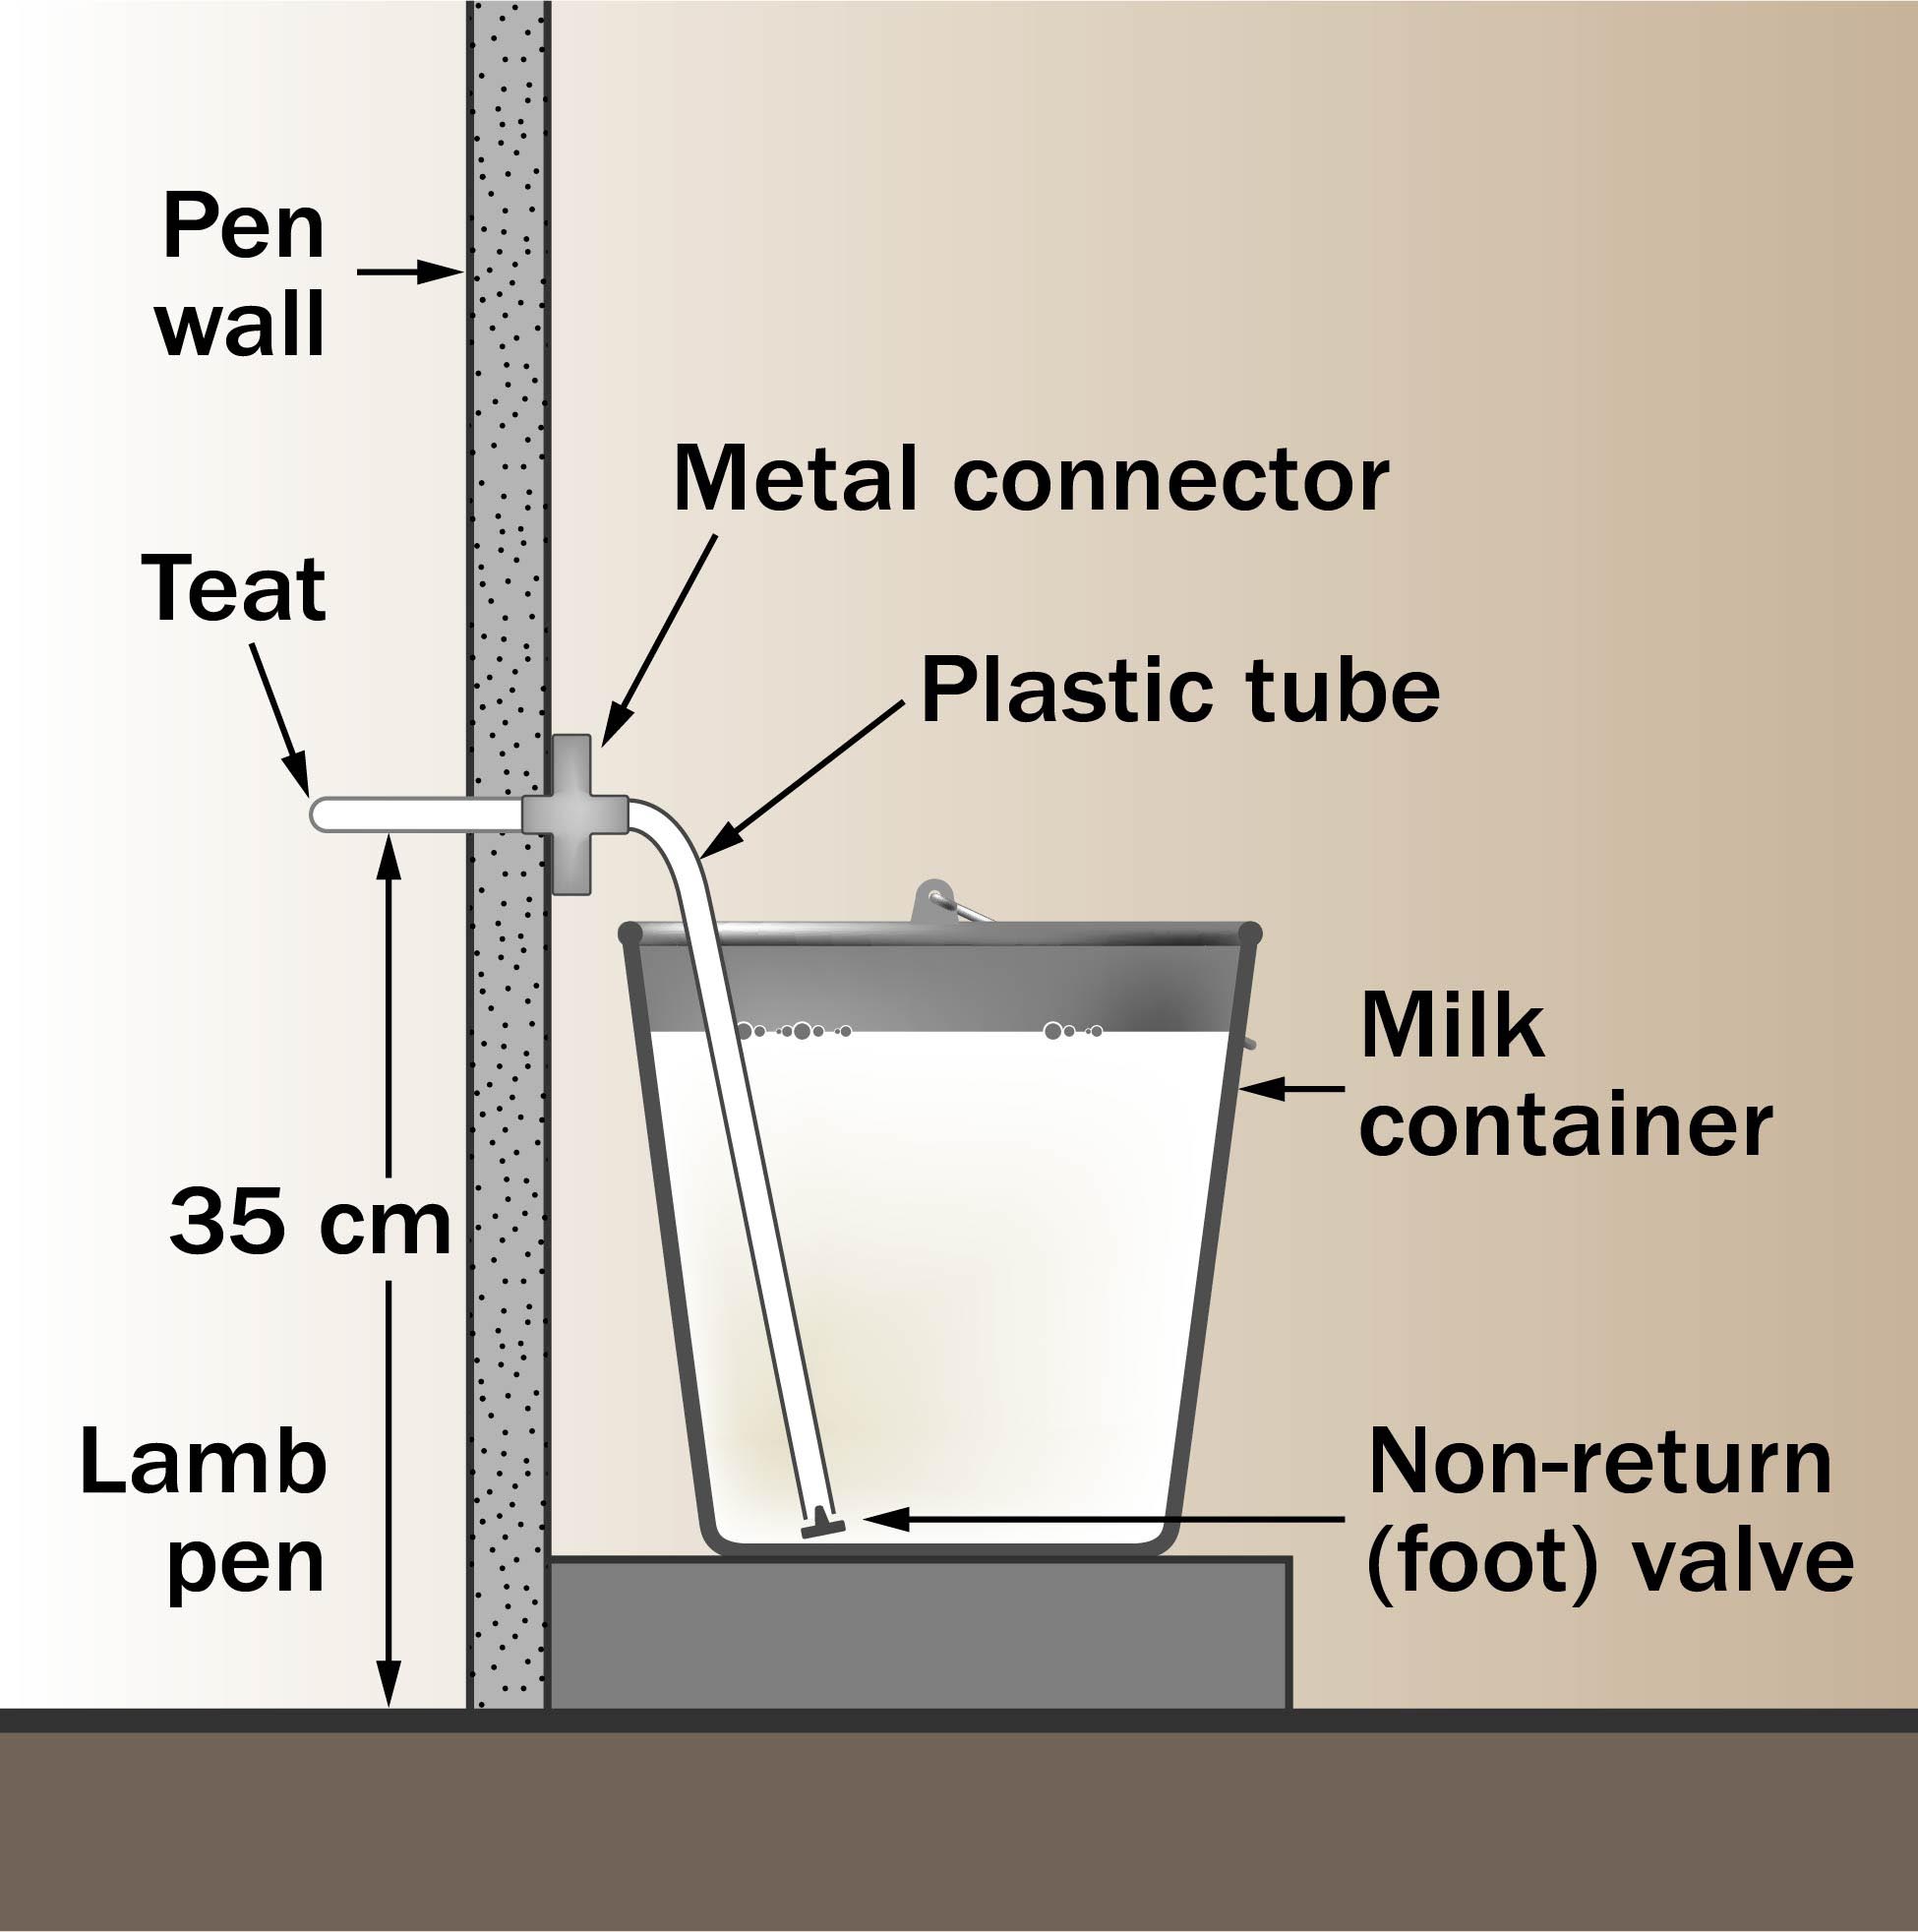 Diagram showing how a nipple pail works. A pail is located on one side of the pen wall. There is a hole in the wall 36 cm above the pen floor. A nipple sticks out into the pen on the opposite side of the pail. A plastic tube with a non-return foot valve goes into the pail or milk container.